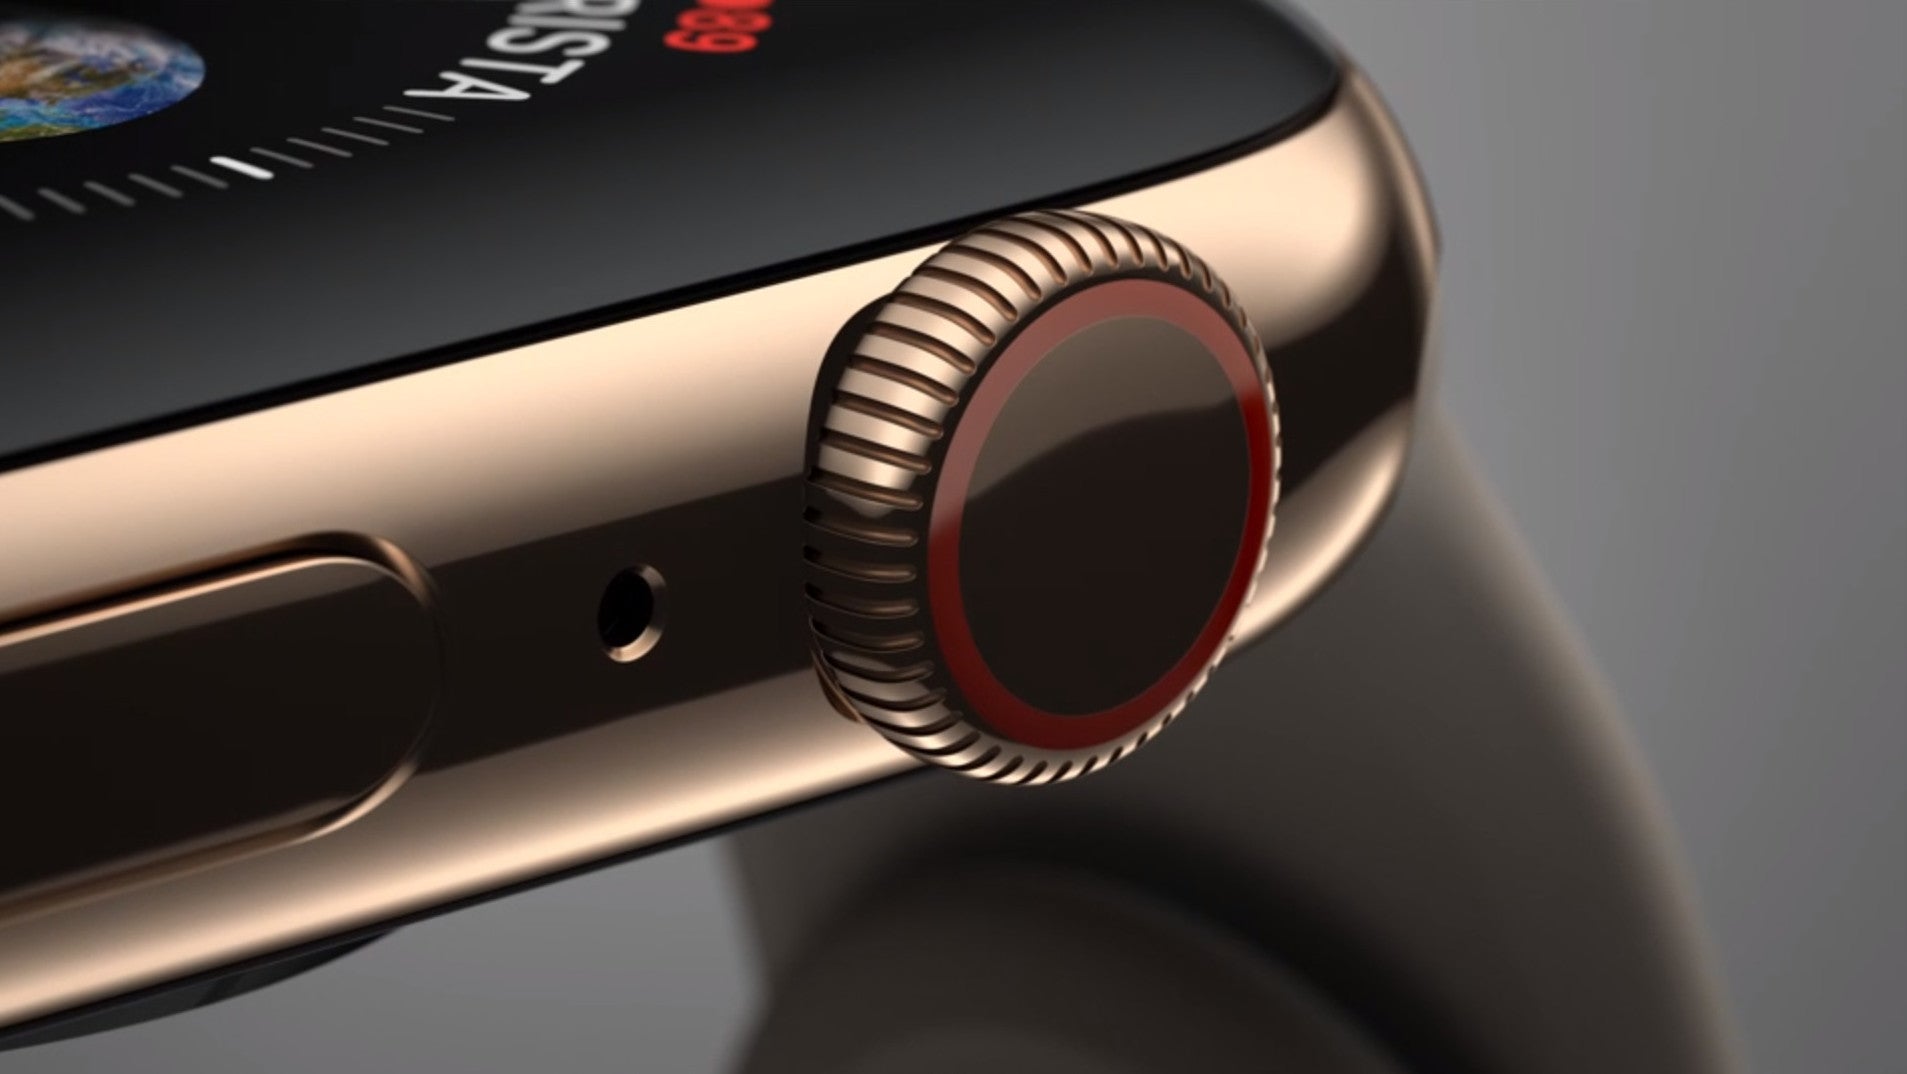 The Apple Watch Series 4 comes with a new digital crown with haptic feedback - Apple Watch Series 4 is official with bigger screen, faster processor, redesigned crown